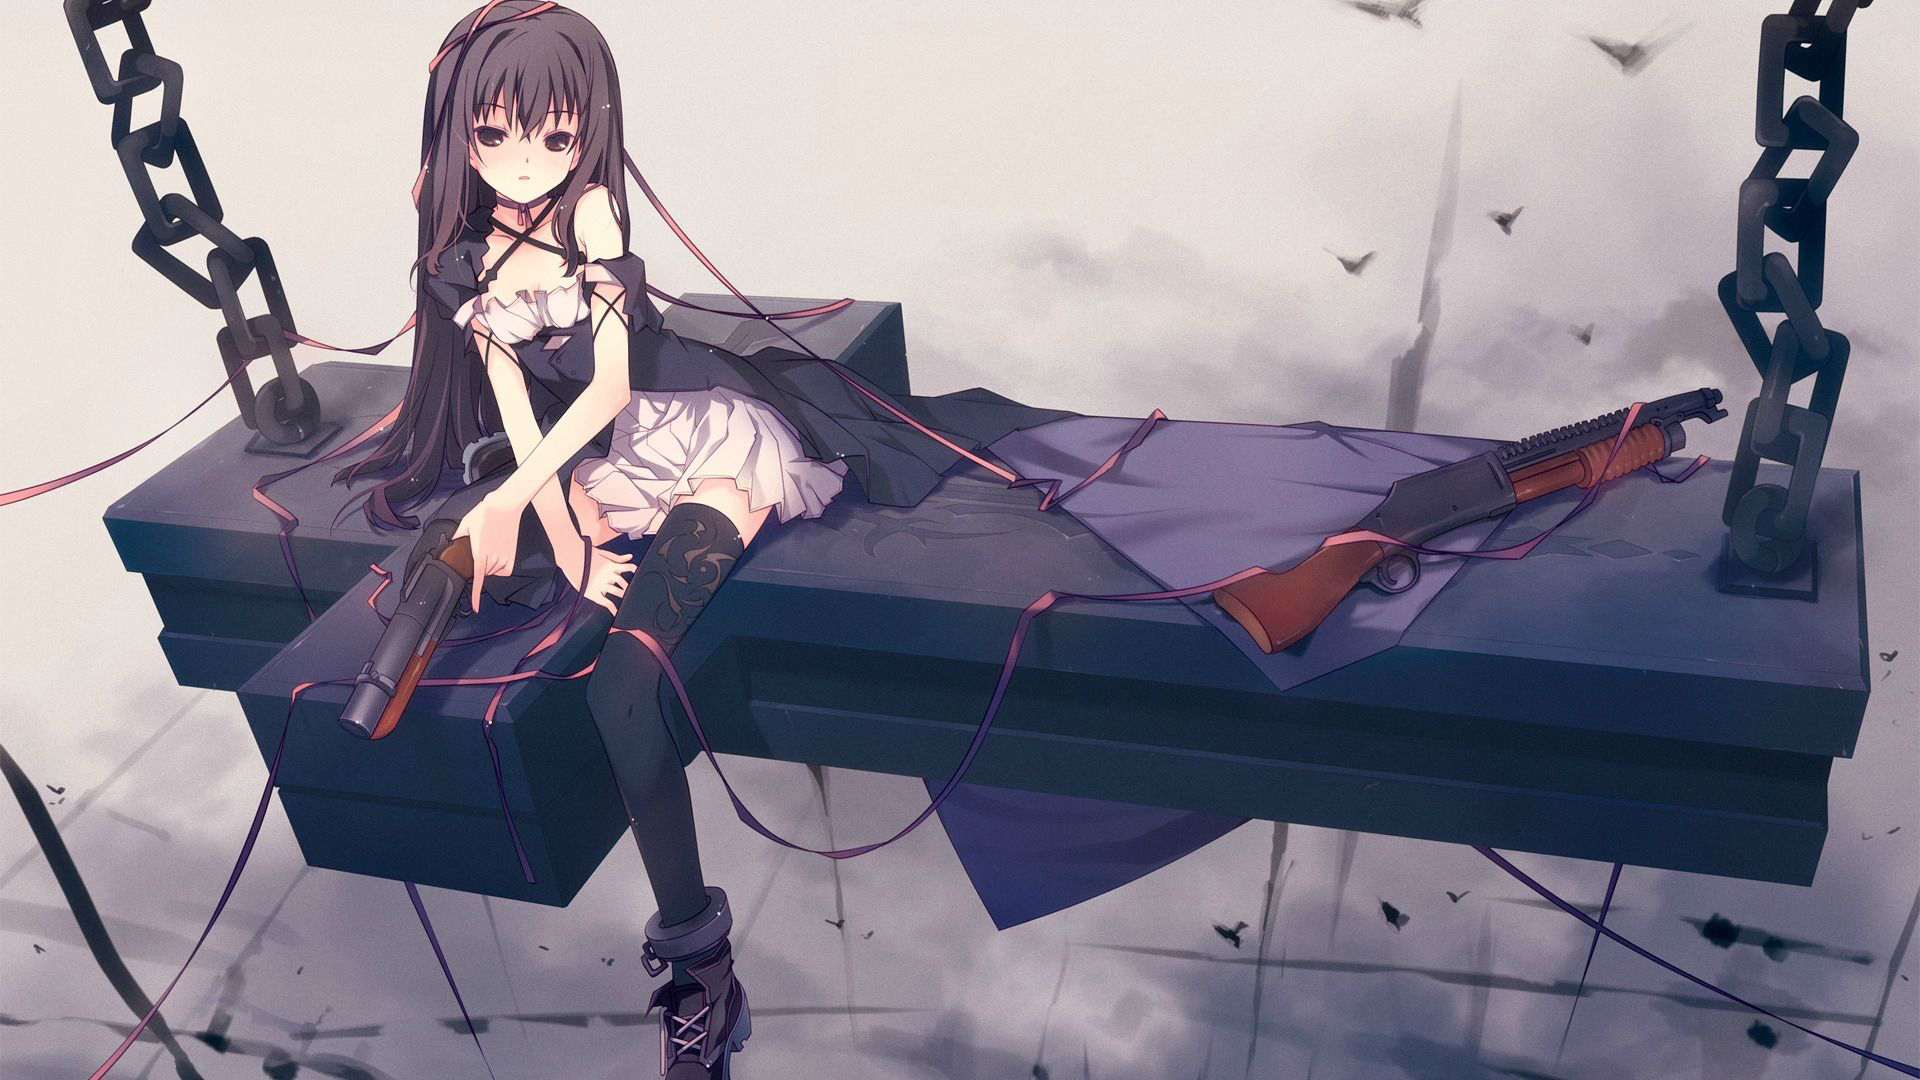 152 Anime Wallpaper Examples For Your Desktop Background